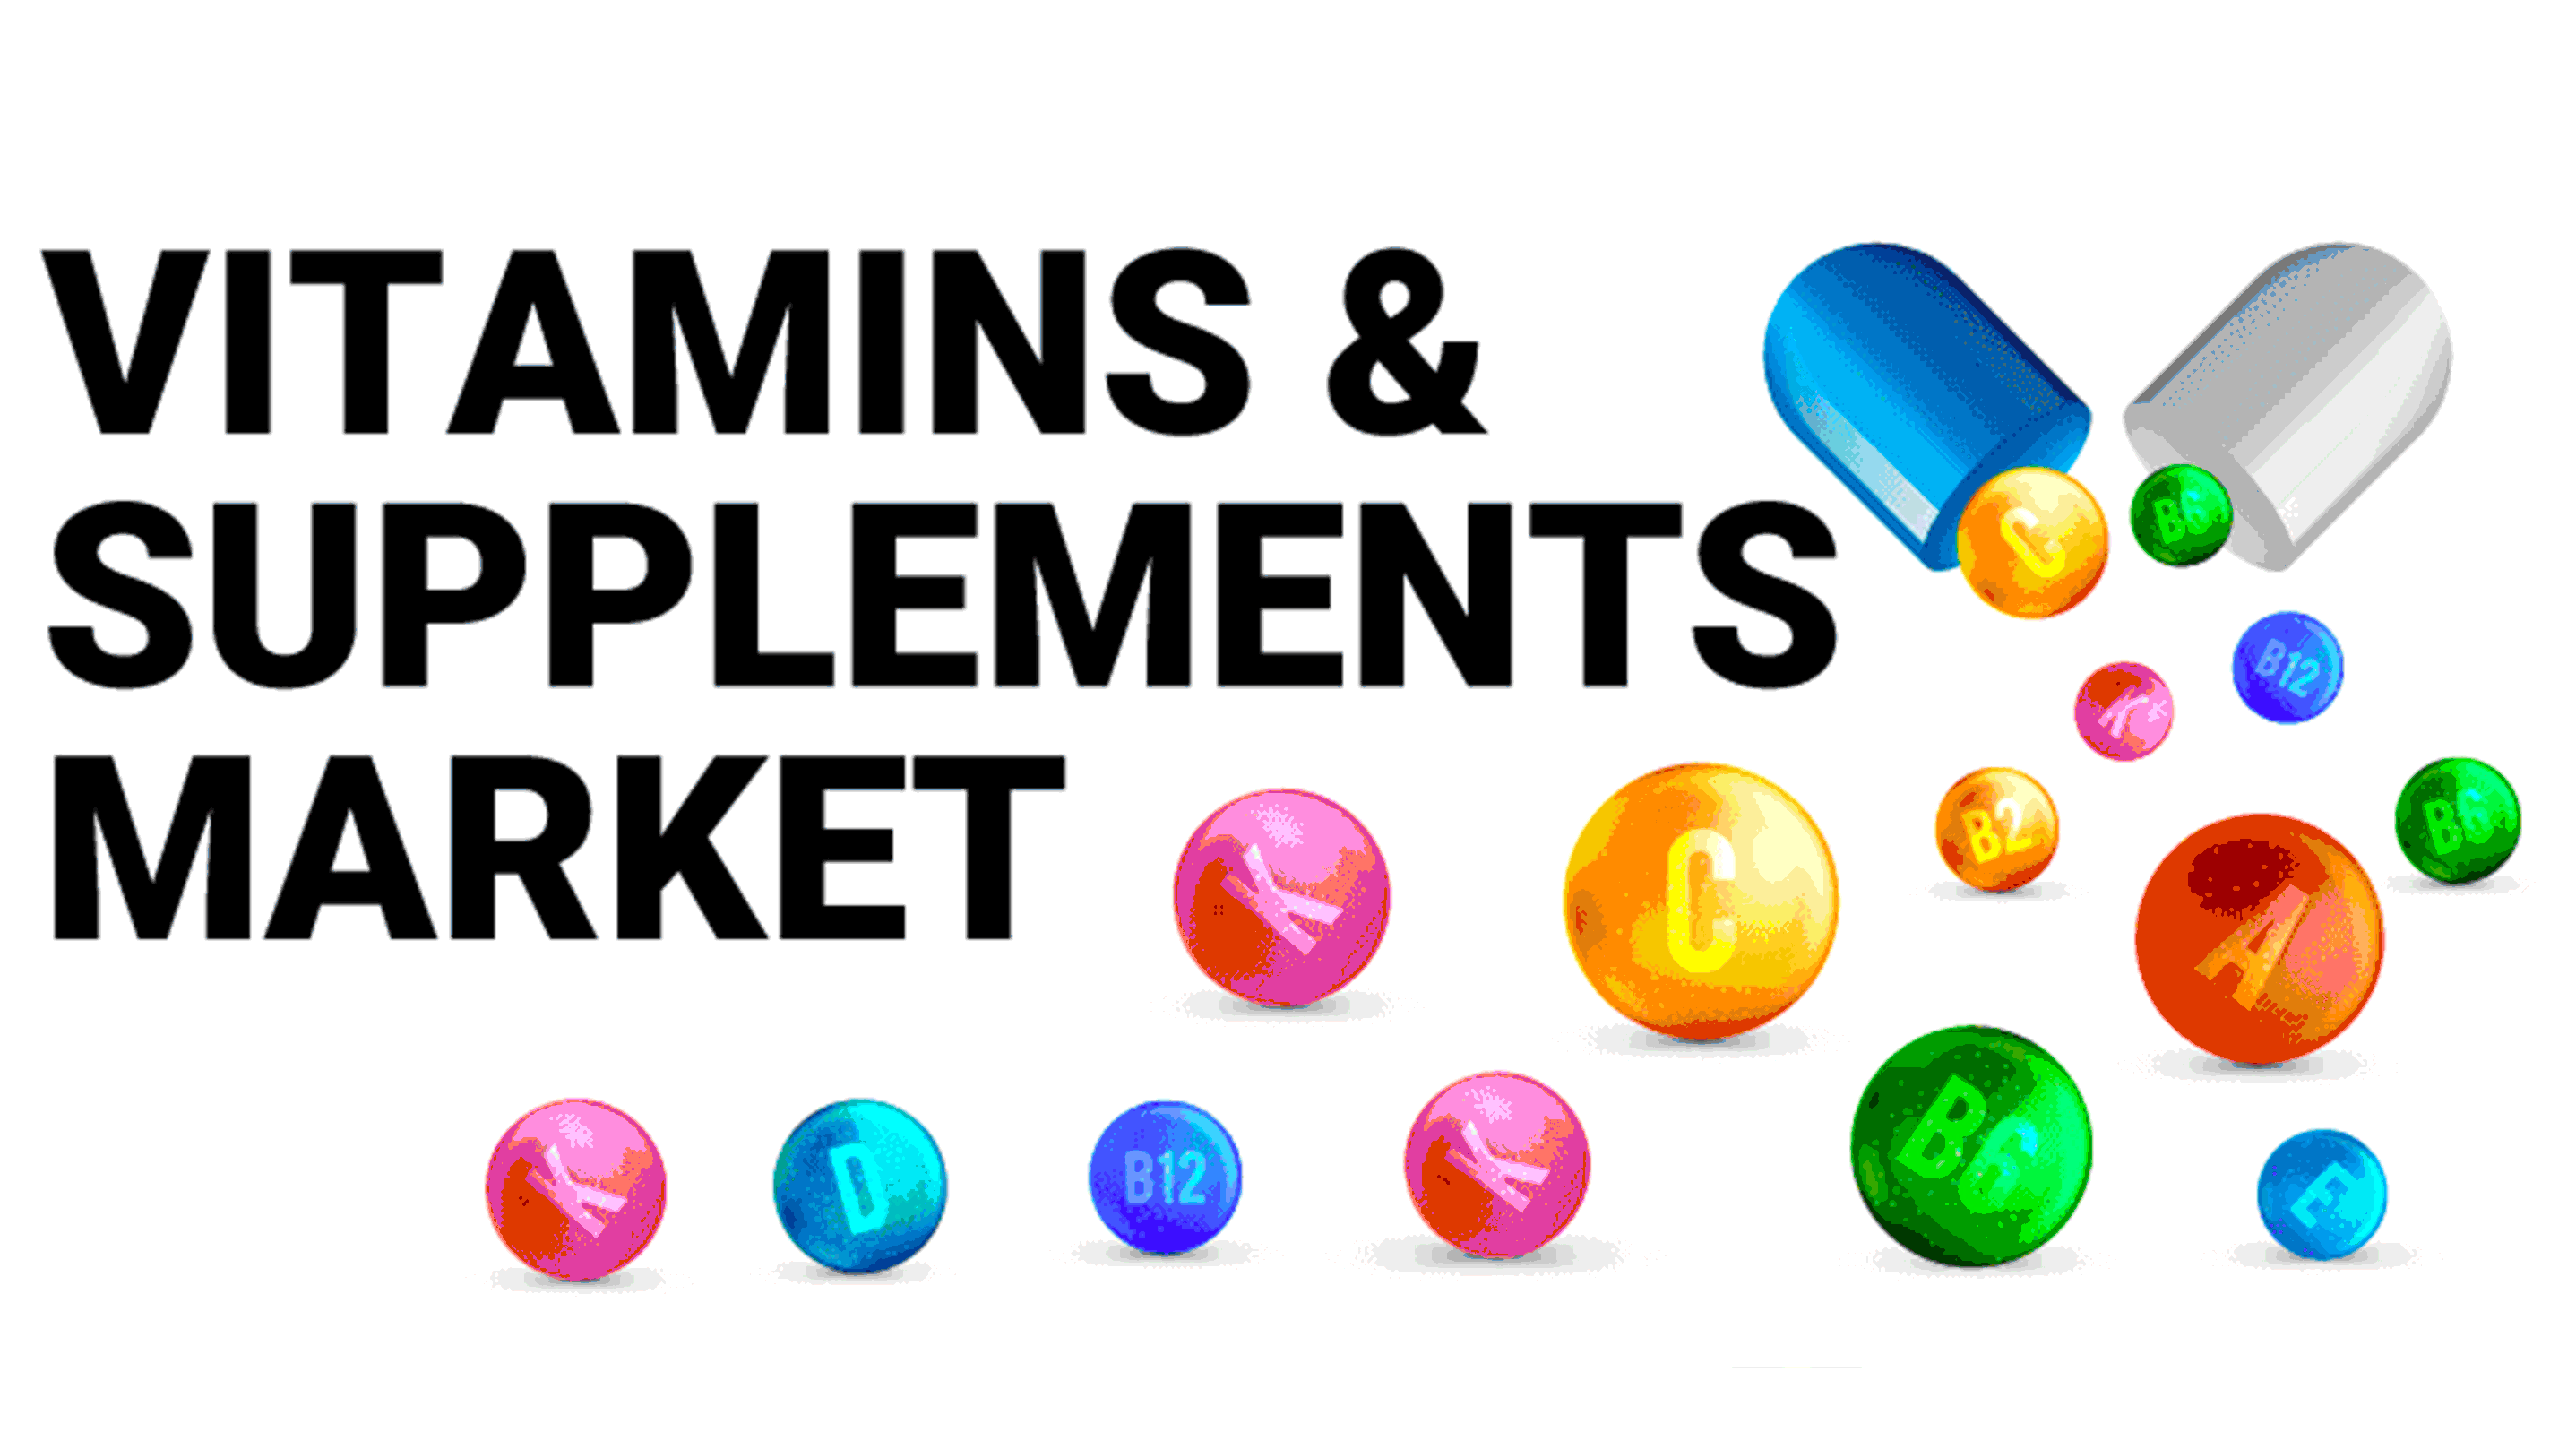 Infographic on the supplements' market.